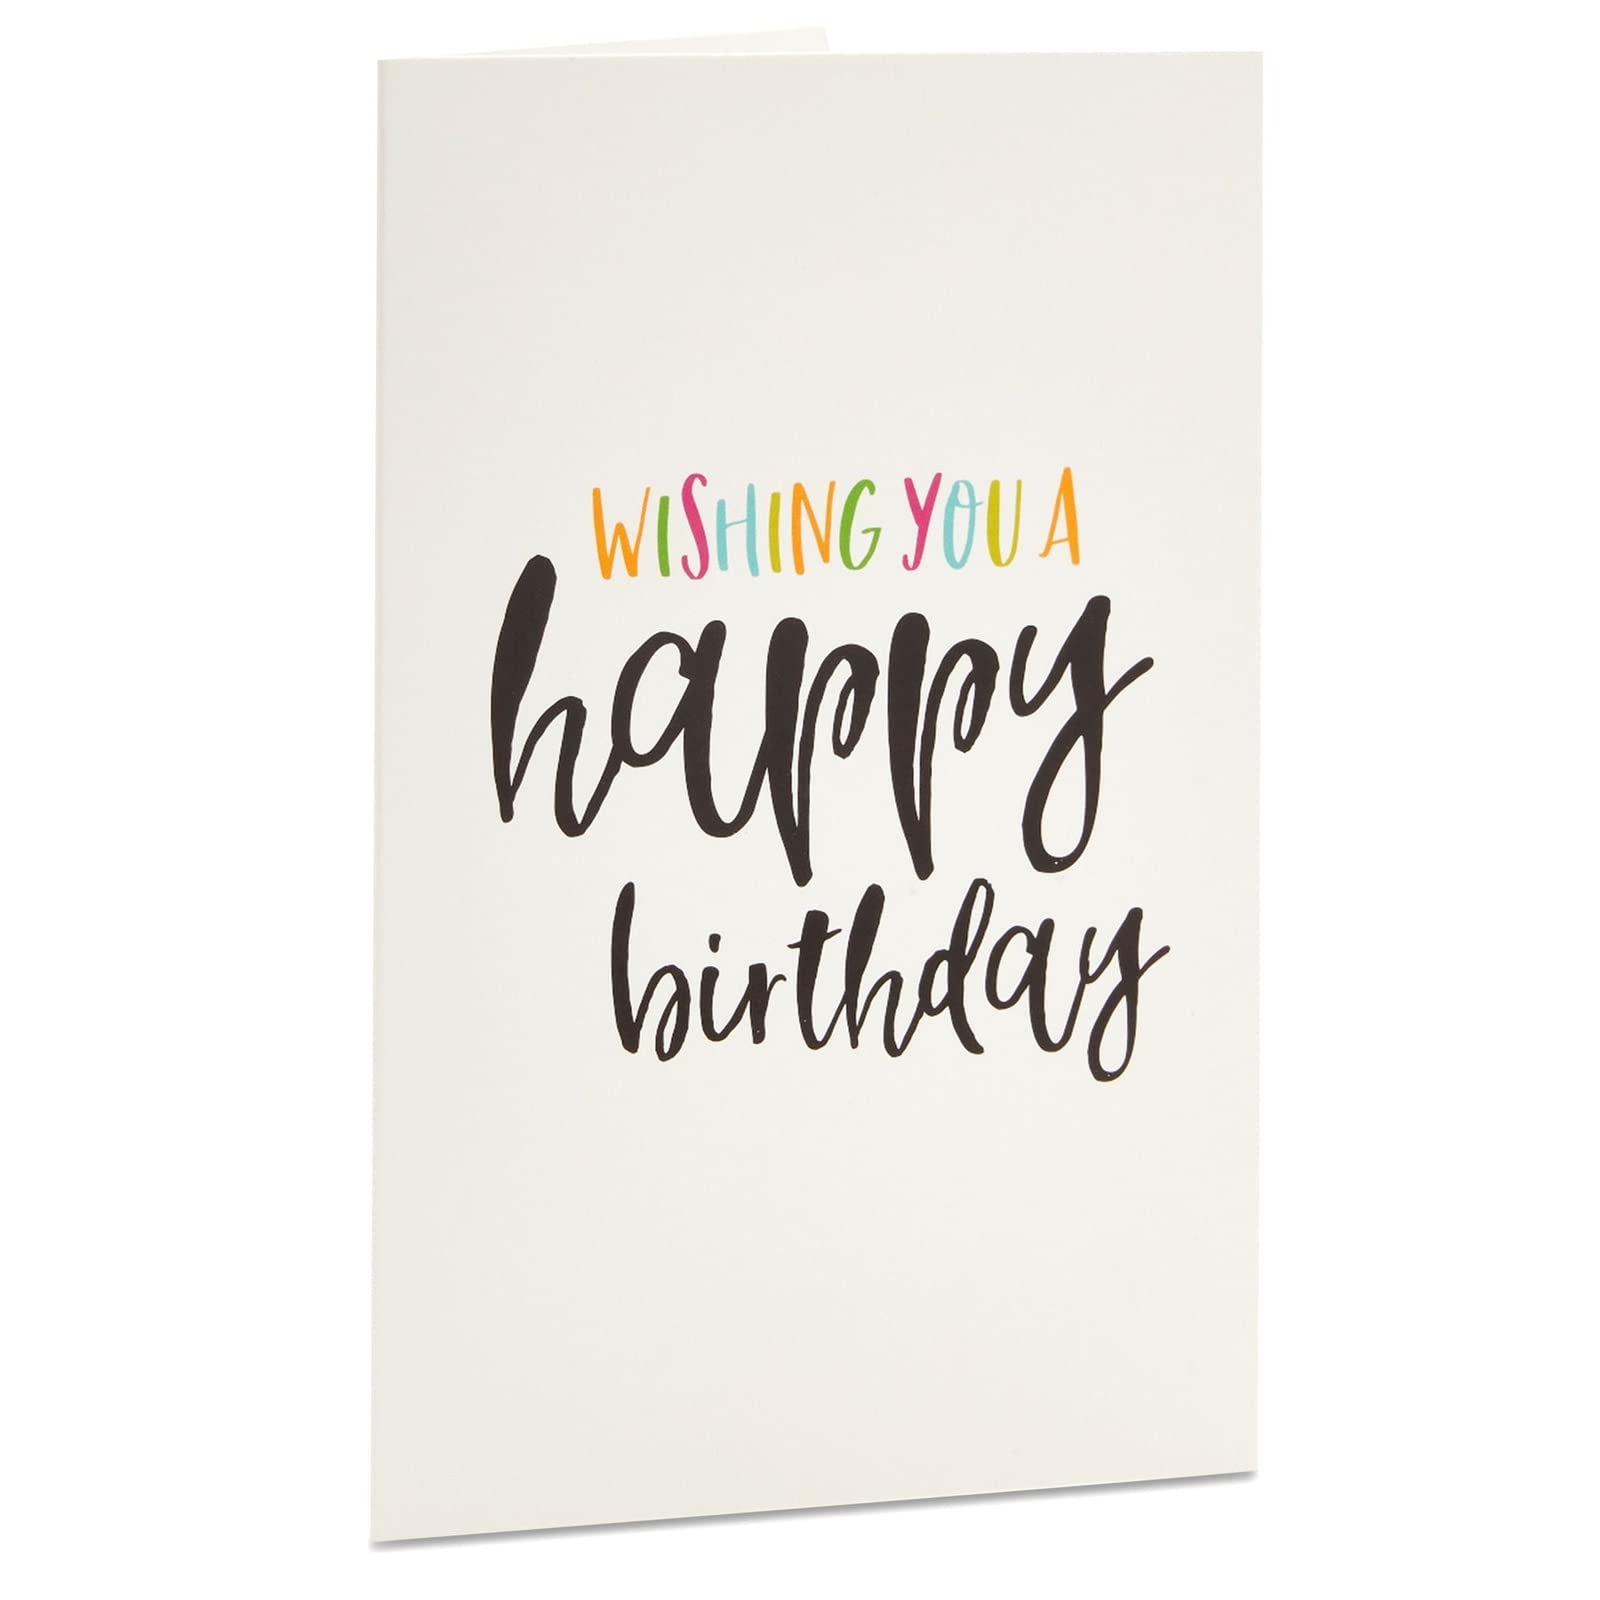 Happy Birthday Greeting Cards (48-Pack) - 6 Handwritten Modern Style, Colourful Designs - Blank on the Inside, Envelopes Included - 10 x 15 Centimetres